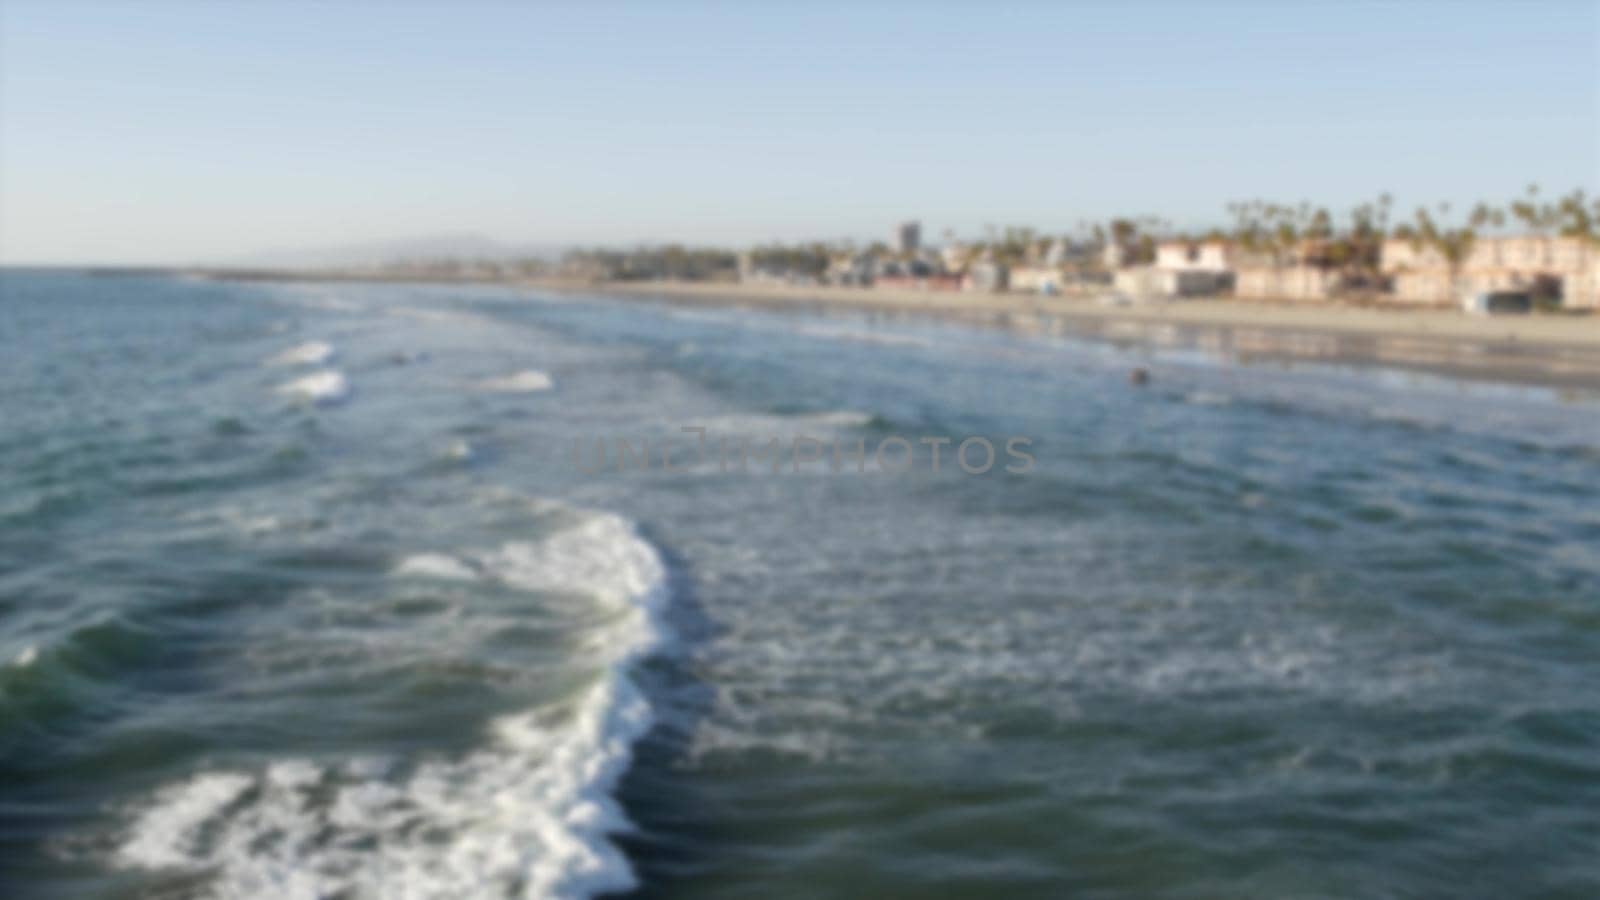 Defocused pacific ocean coast from pier. Sea water waves tide, shore sand. Beachfront vacations resort. Waterfront Oceanside, California USA. Tropical palms and houses on beach. Reflection in littoral